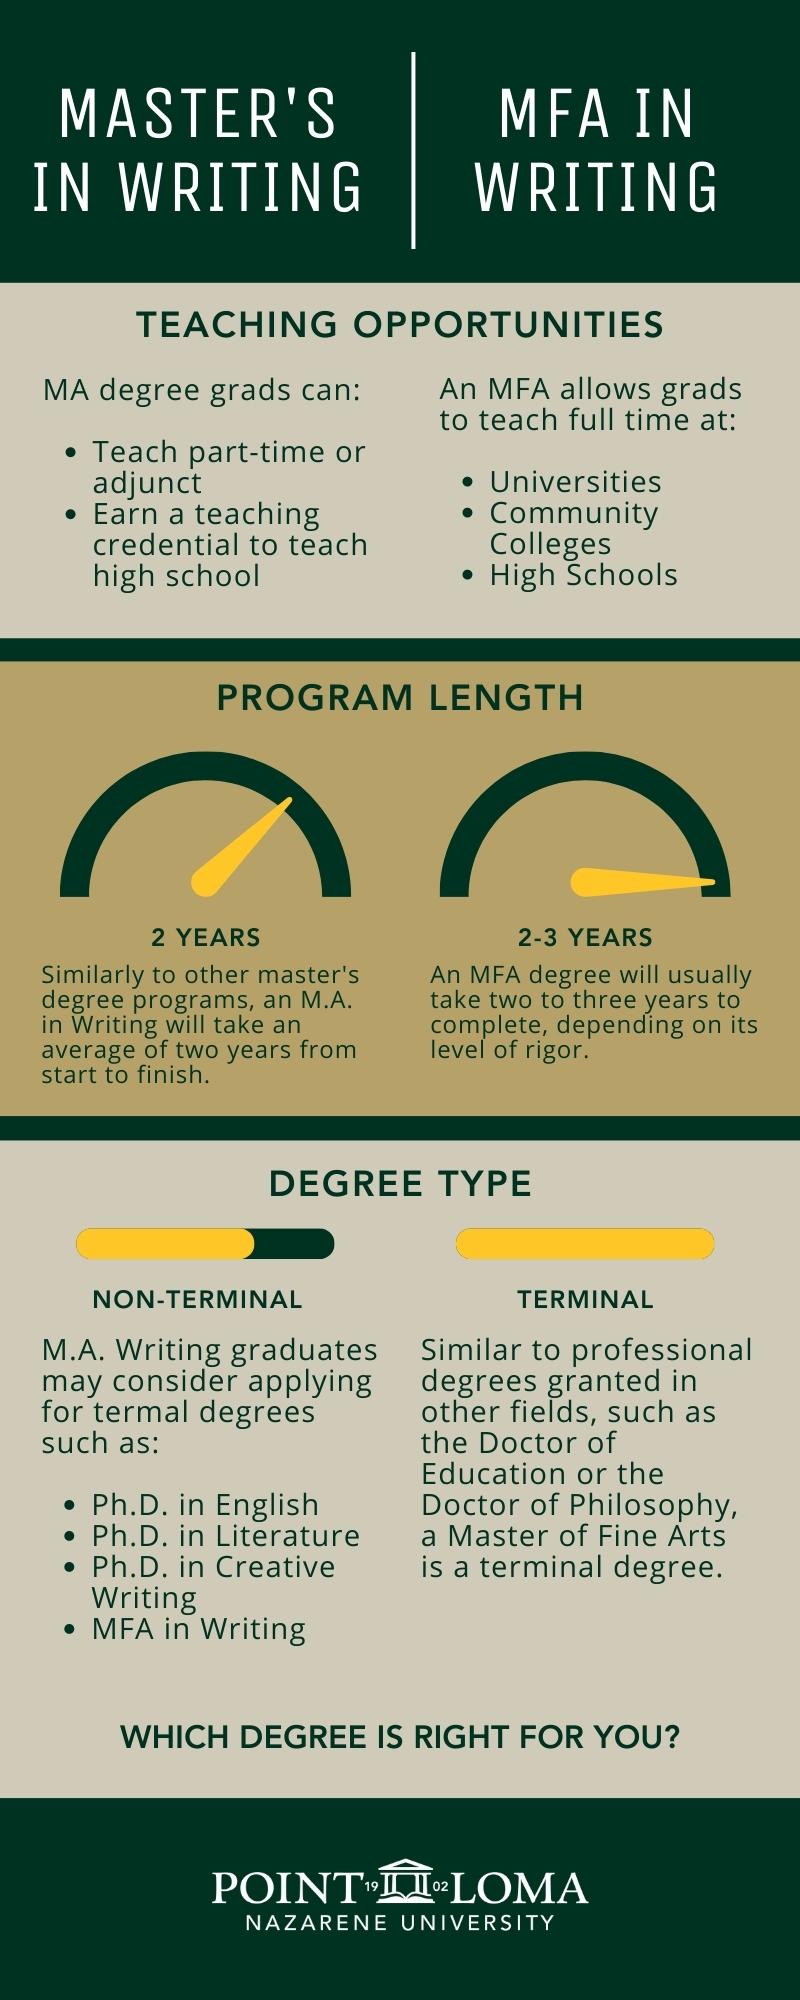 How is MA different from MFA?